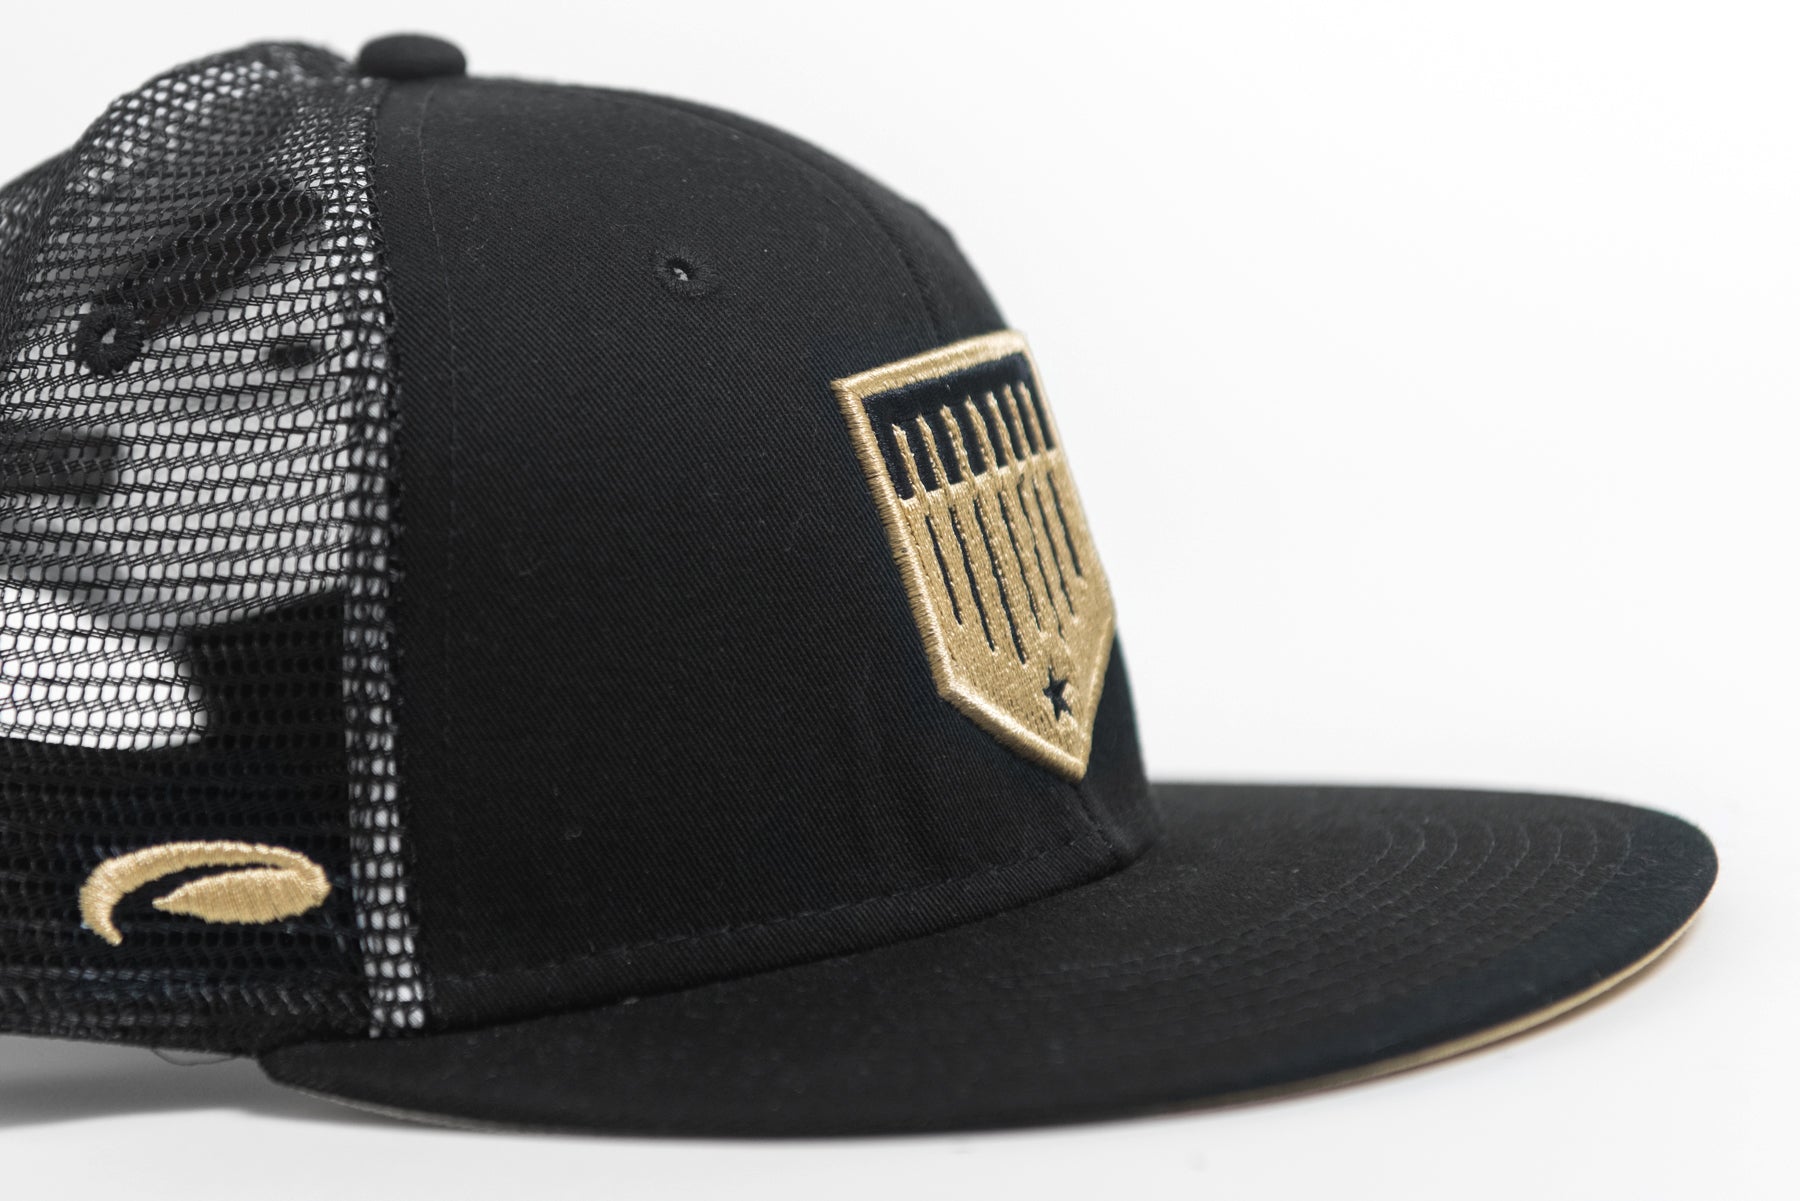 black and gold hat image 3